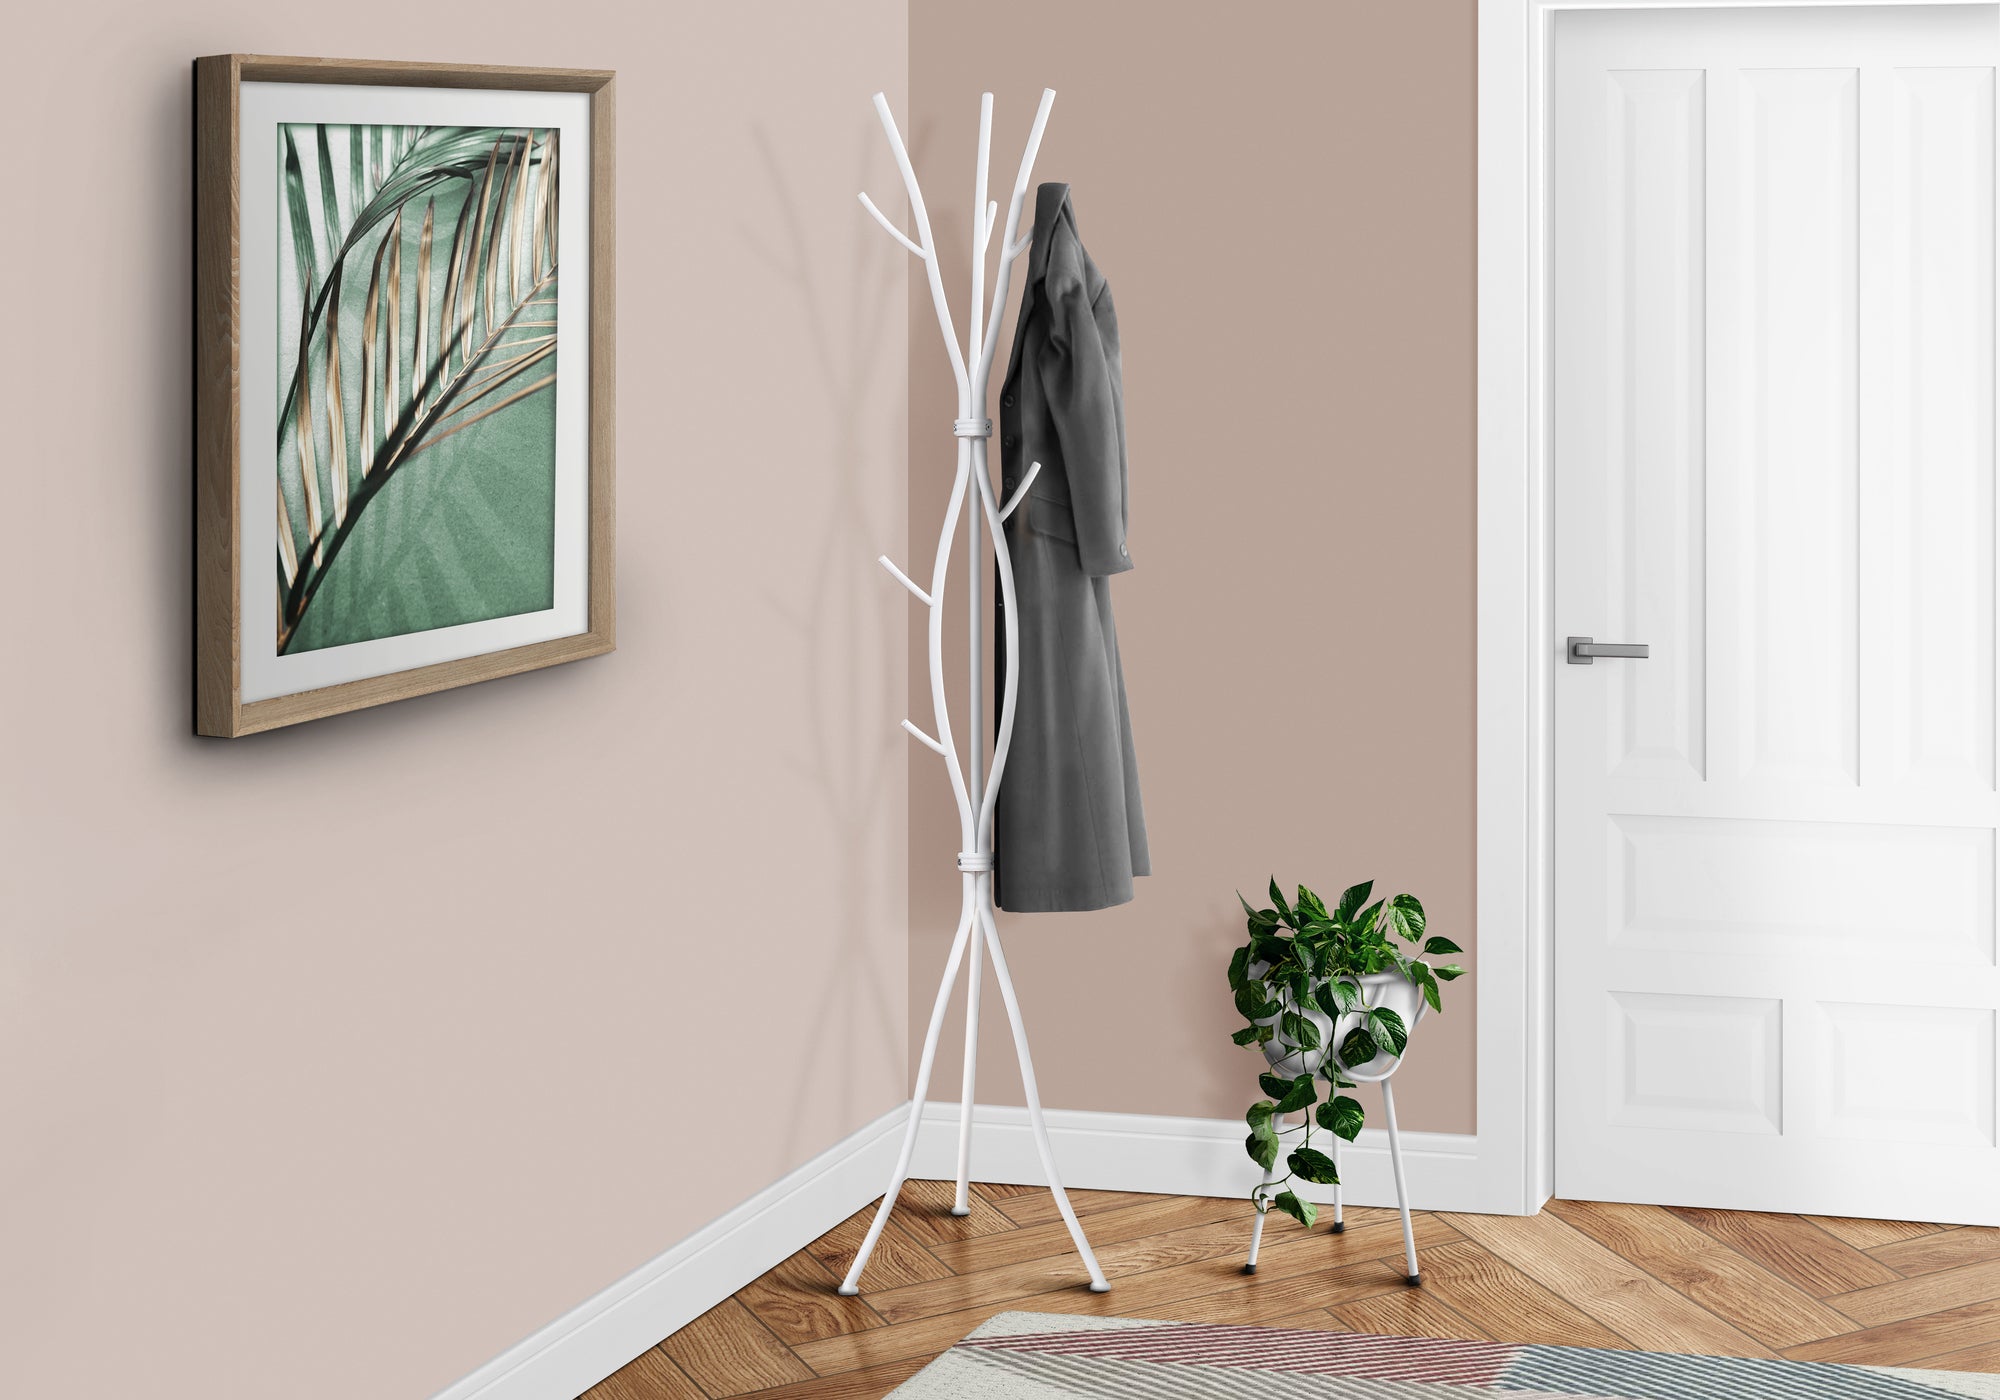 MN-762063    Coat Rack, Hall Tree, Free Standing, 11 Hooks, Entryway, 74"H, Metal, White, Contemporary, Modern